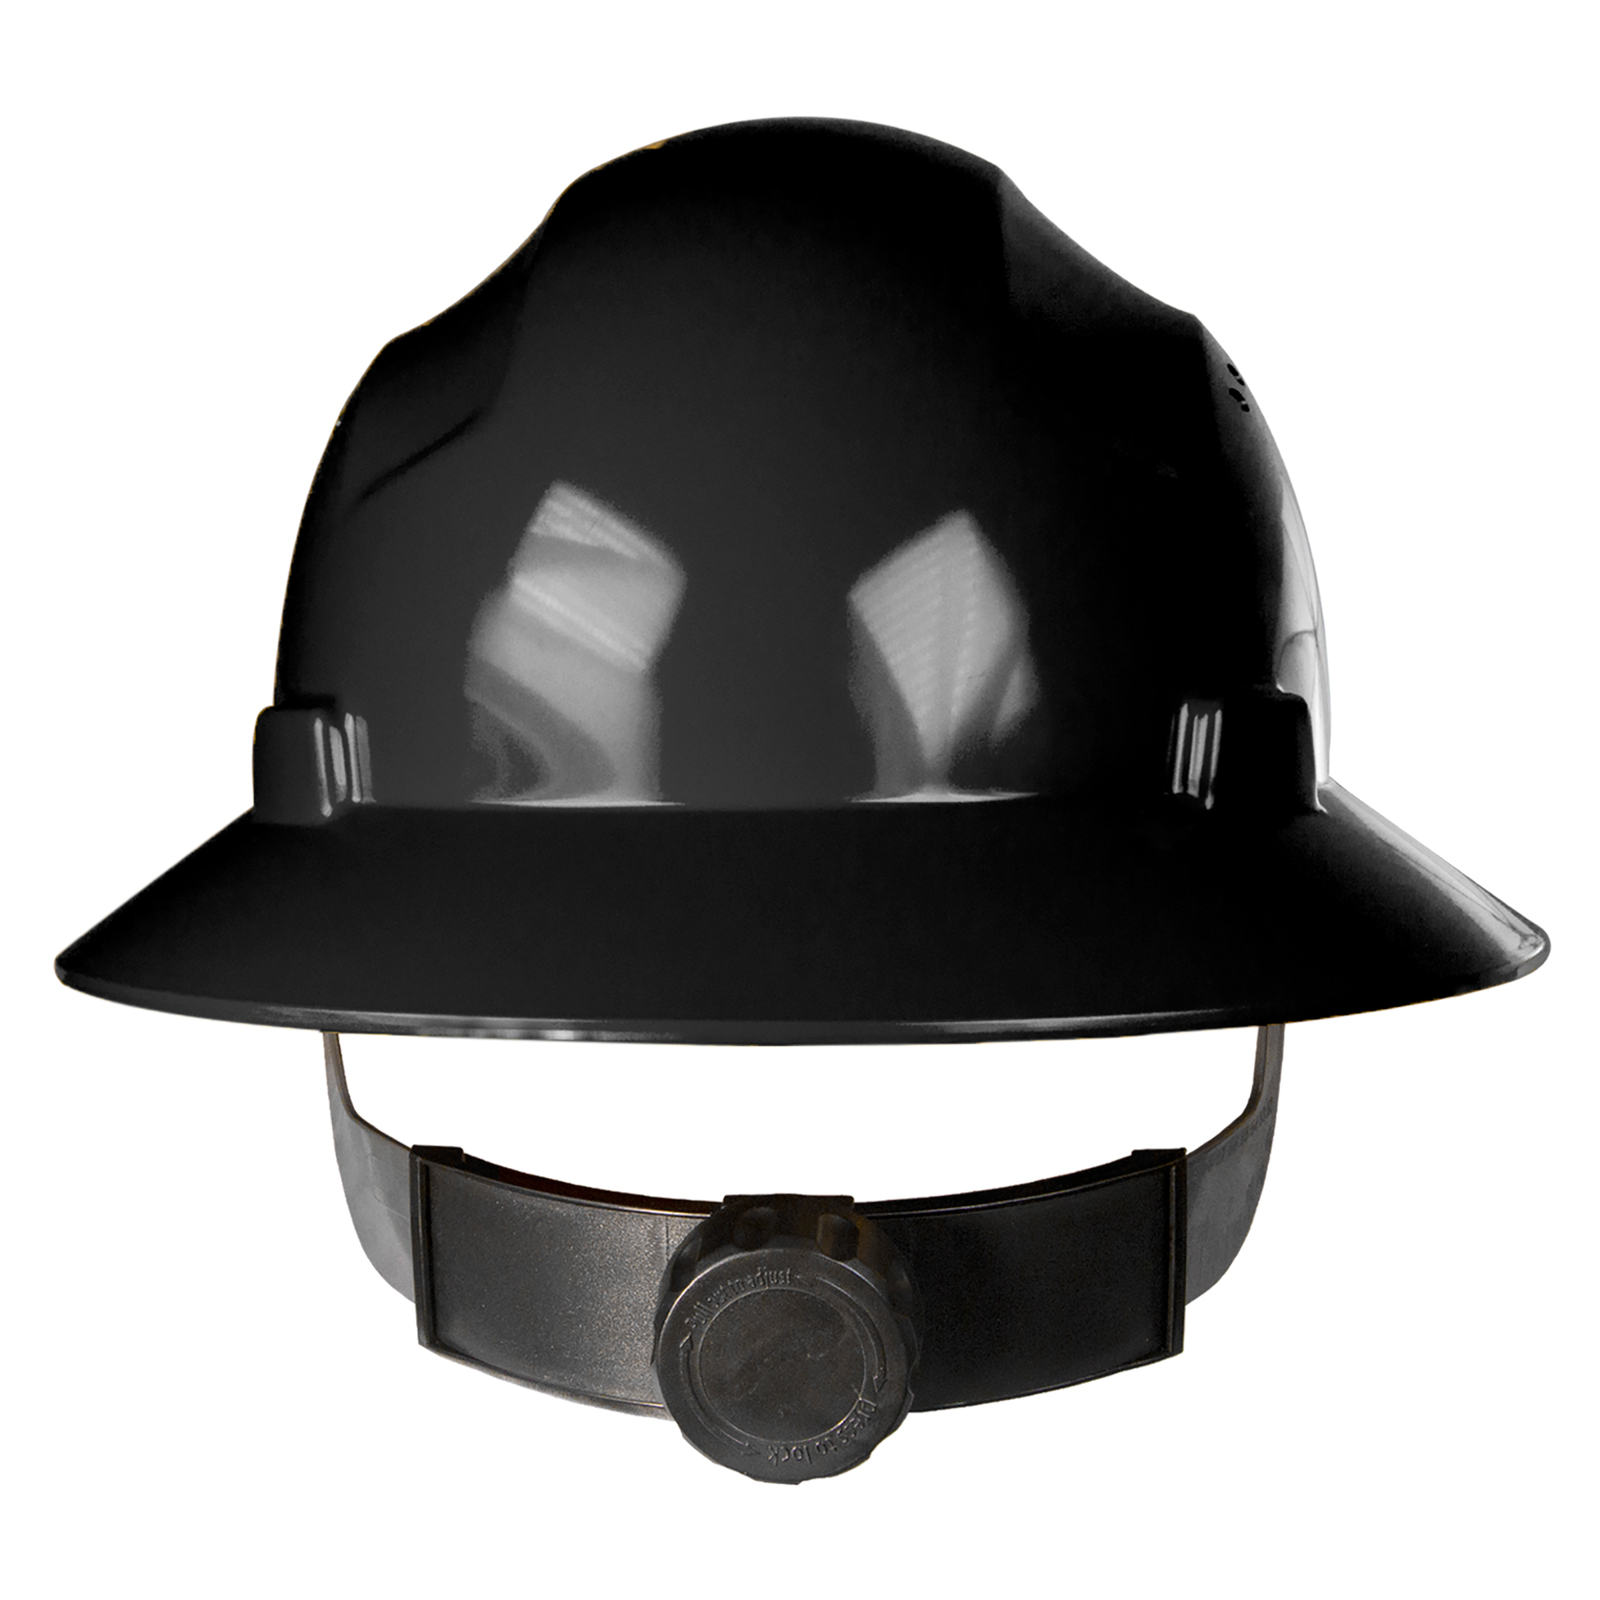 Full brim black safety hard hat with 4 point suspension and black ratchet